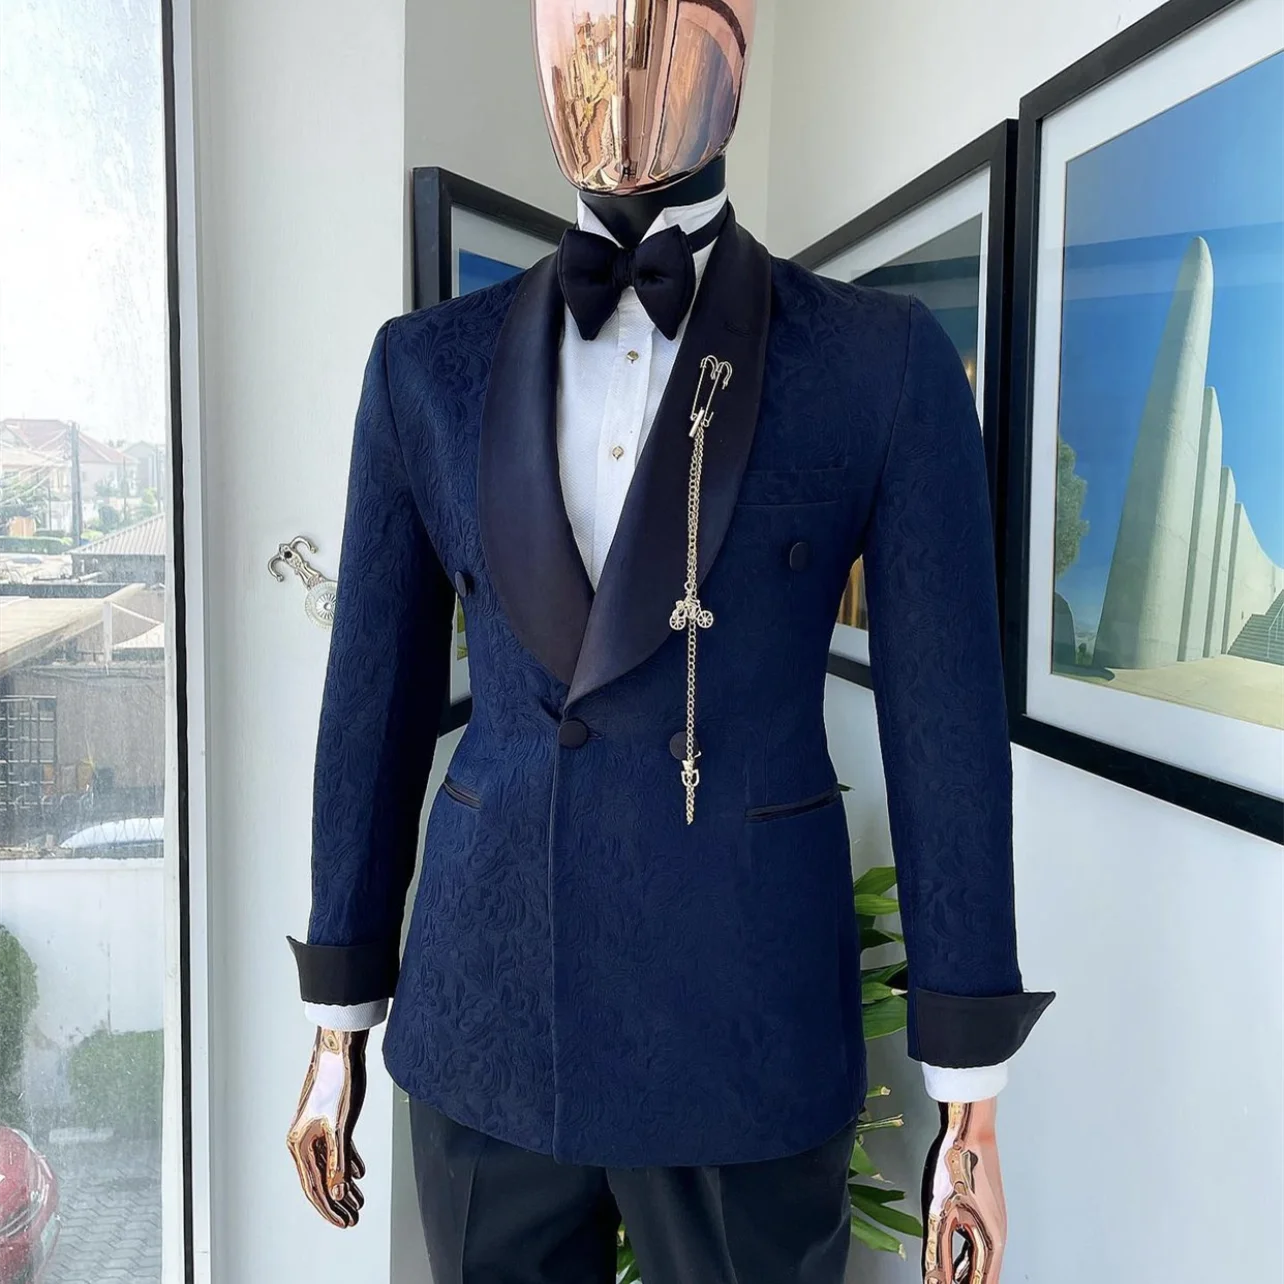 2022 Costume Homme Shawl Lapel Navy Blue Jacquard Blazer Double Breasted Party Groom Wear Men Wedding Suits For Men Prom Tuxedo